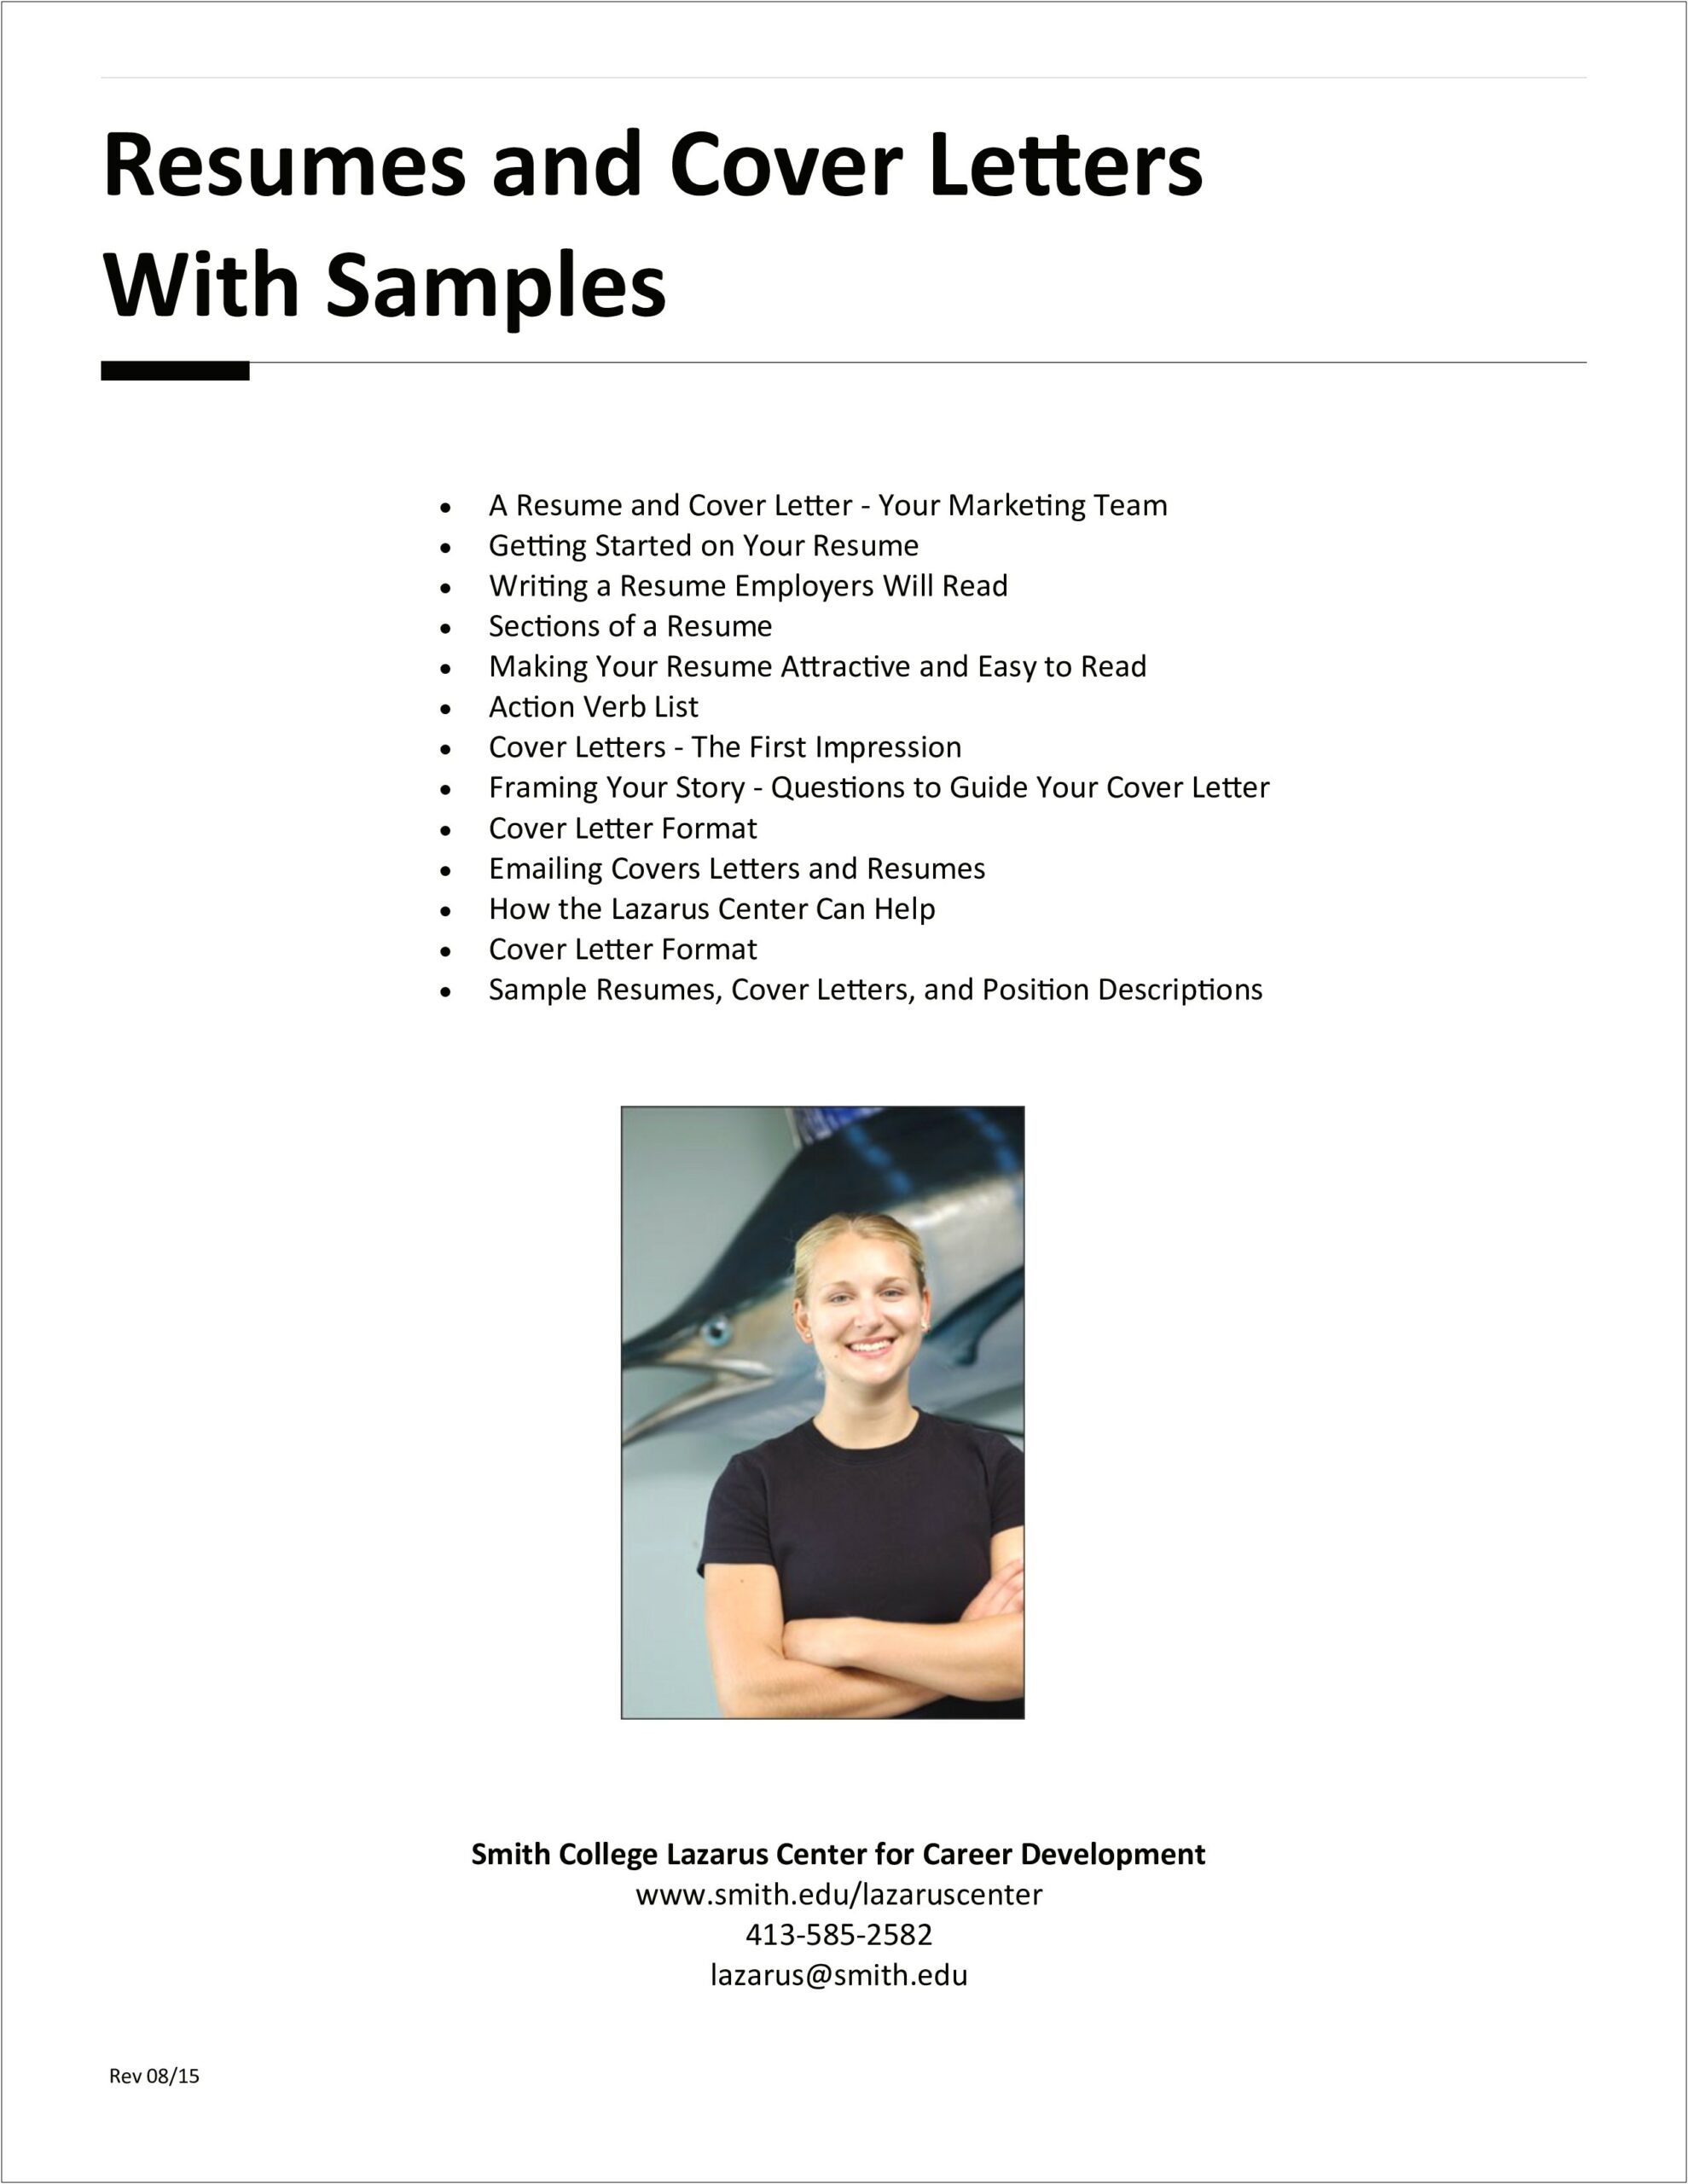 Sample Resumes That Include Professional Development